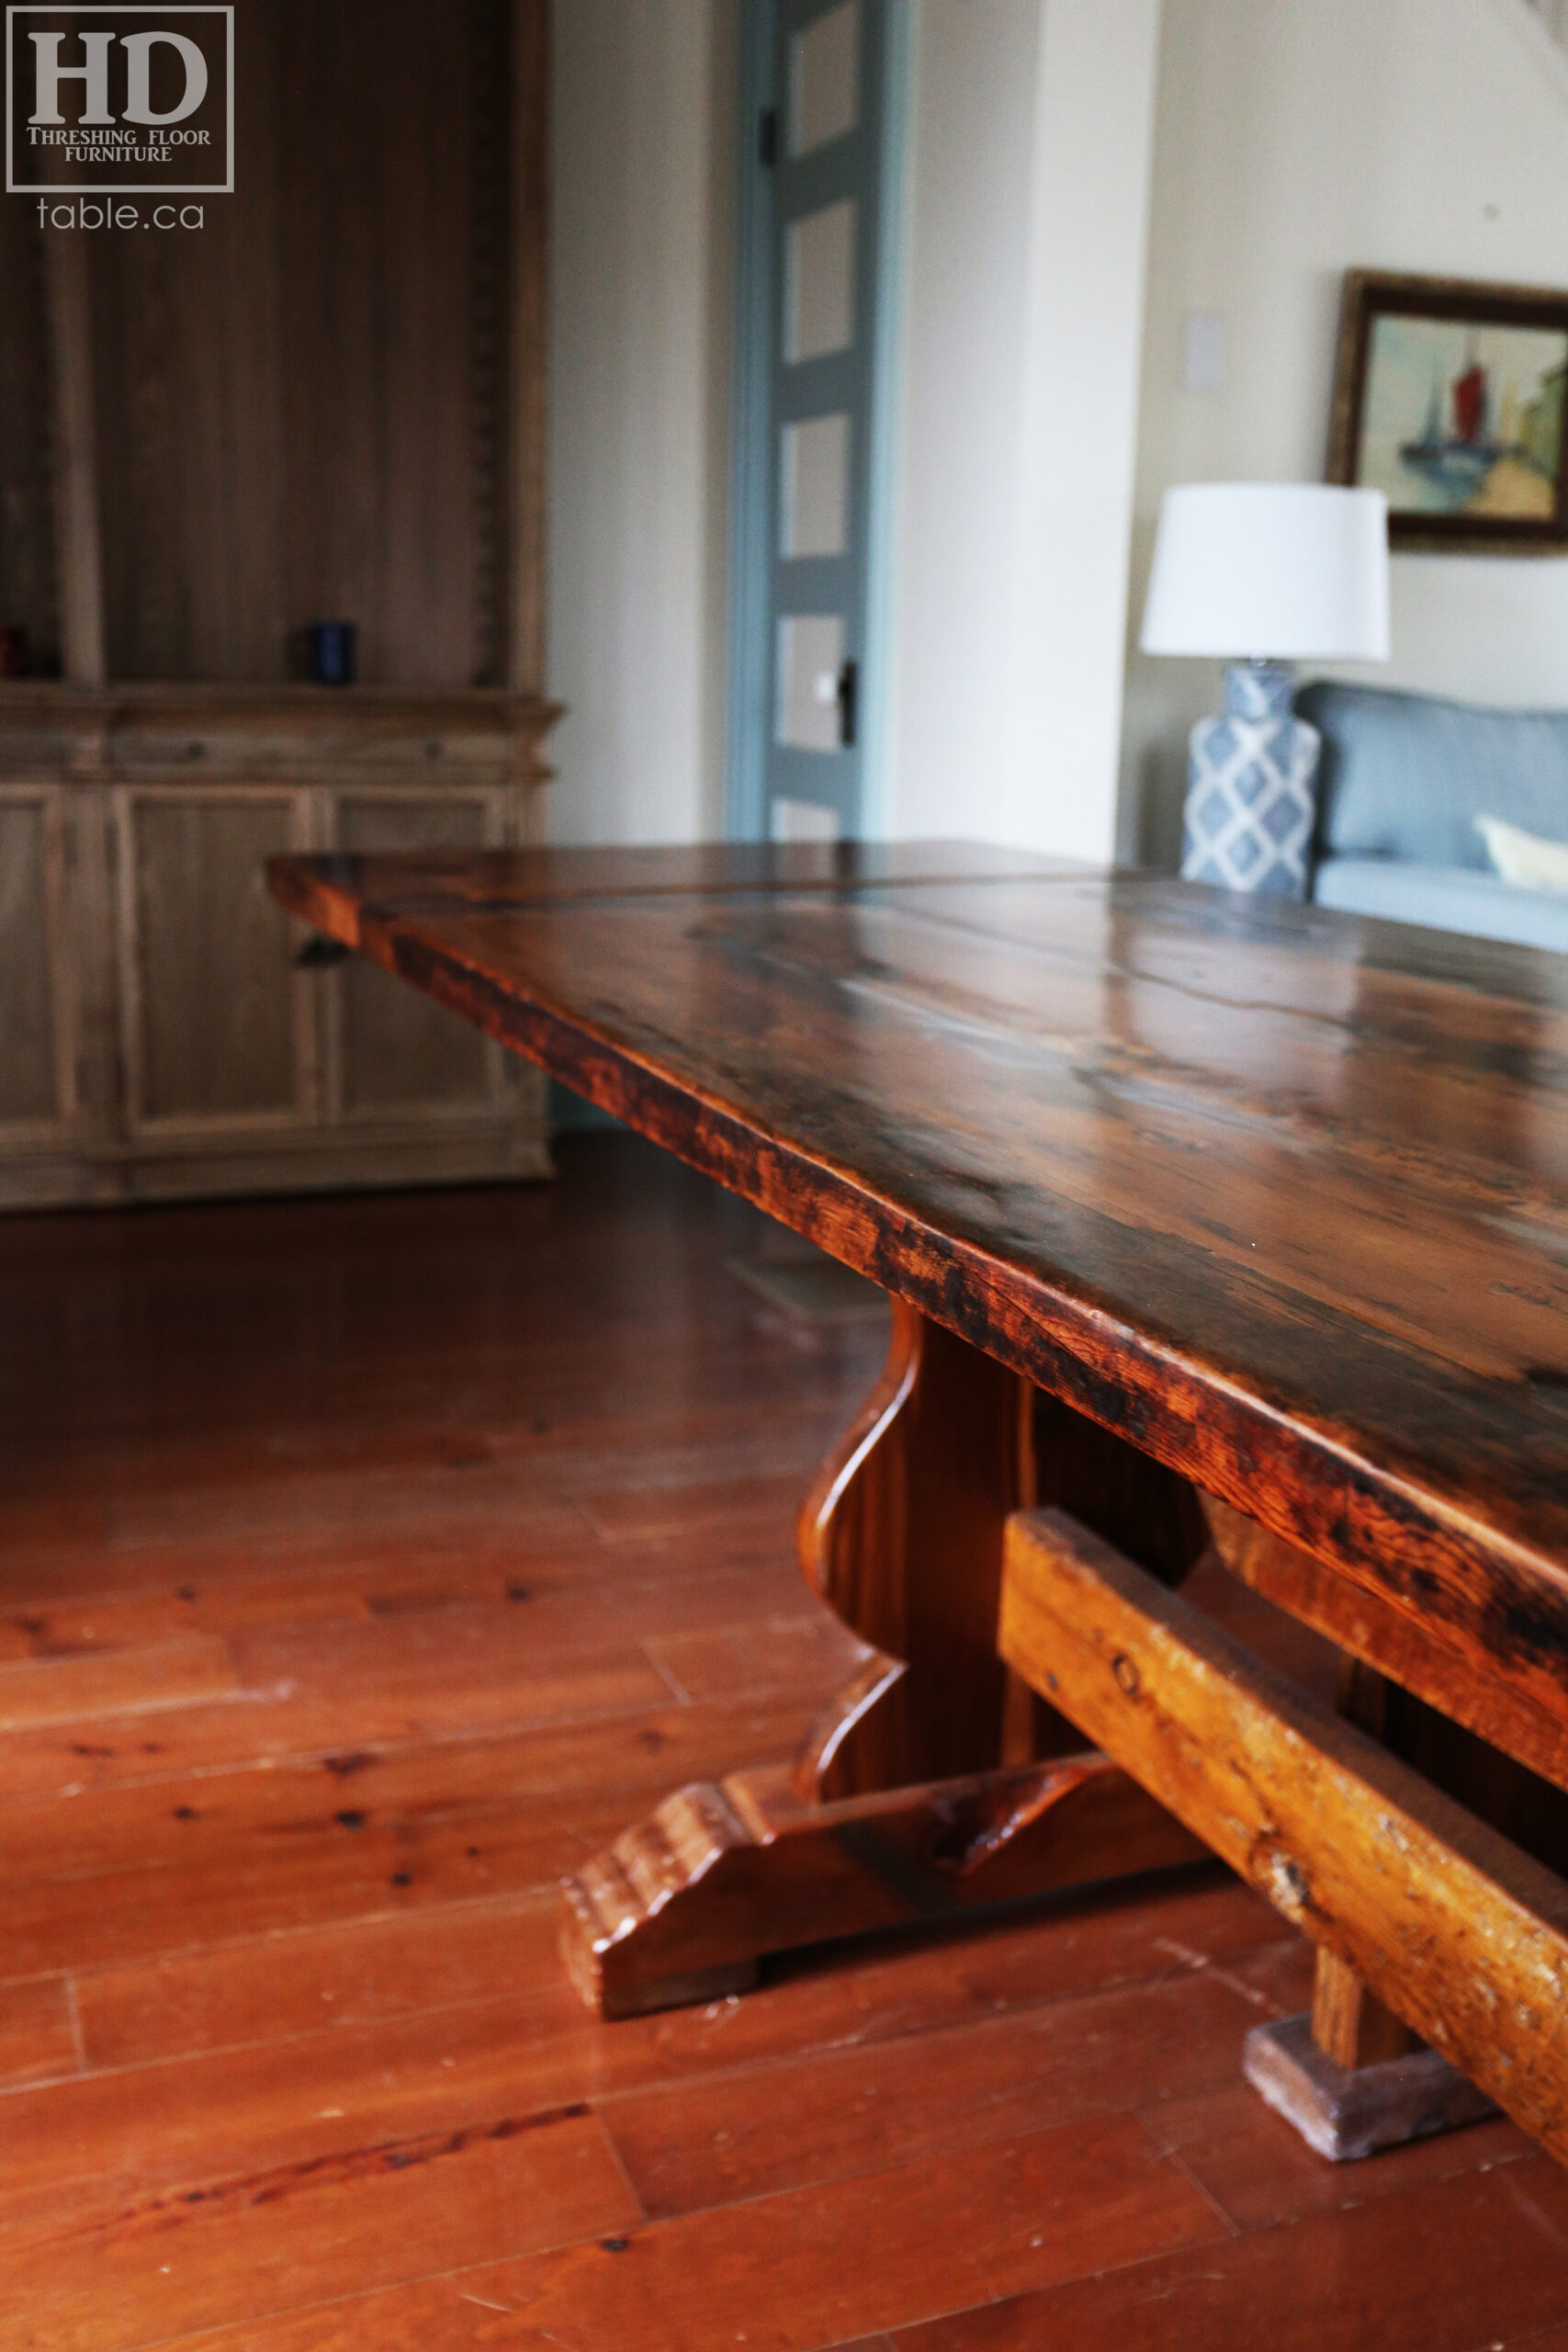 Reclaimed Wood Cottage Table made from Ontario Barnwood by HD Threshing Floor Furniture / www.table.ca